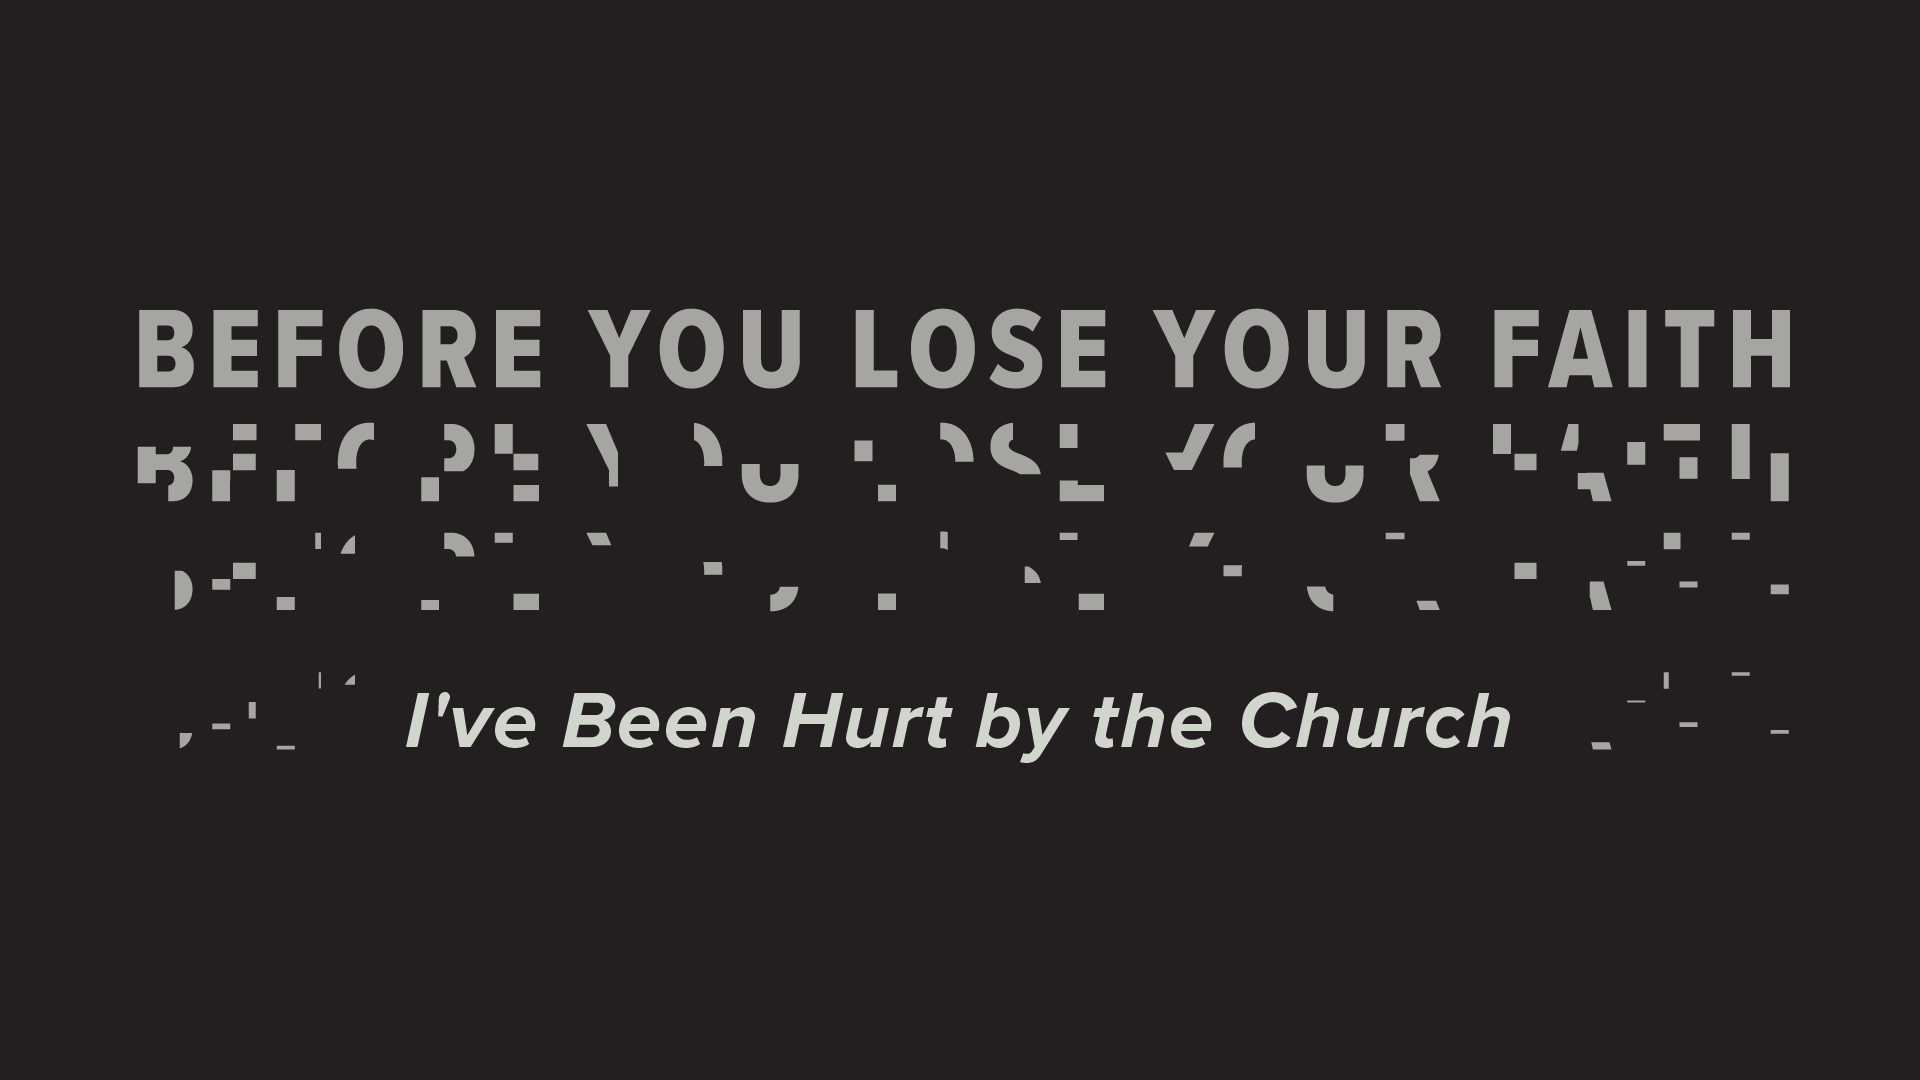 I've Been Hurt by the Church